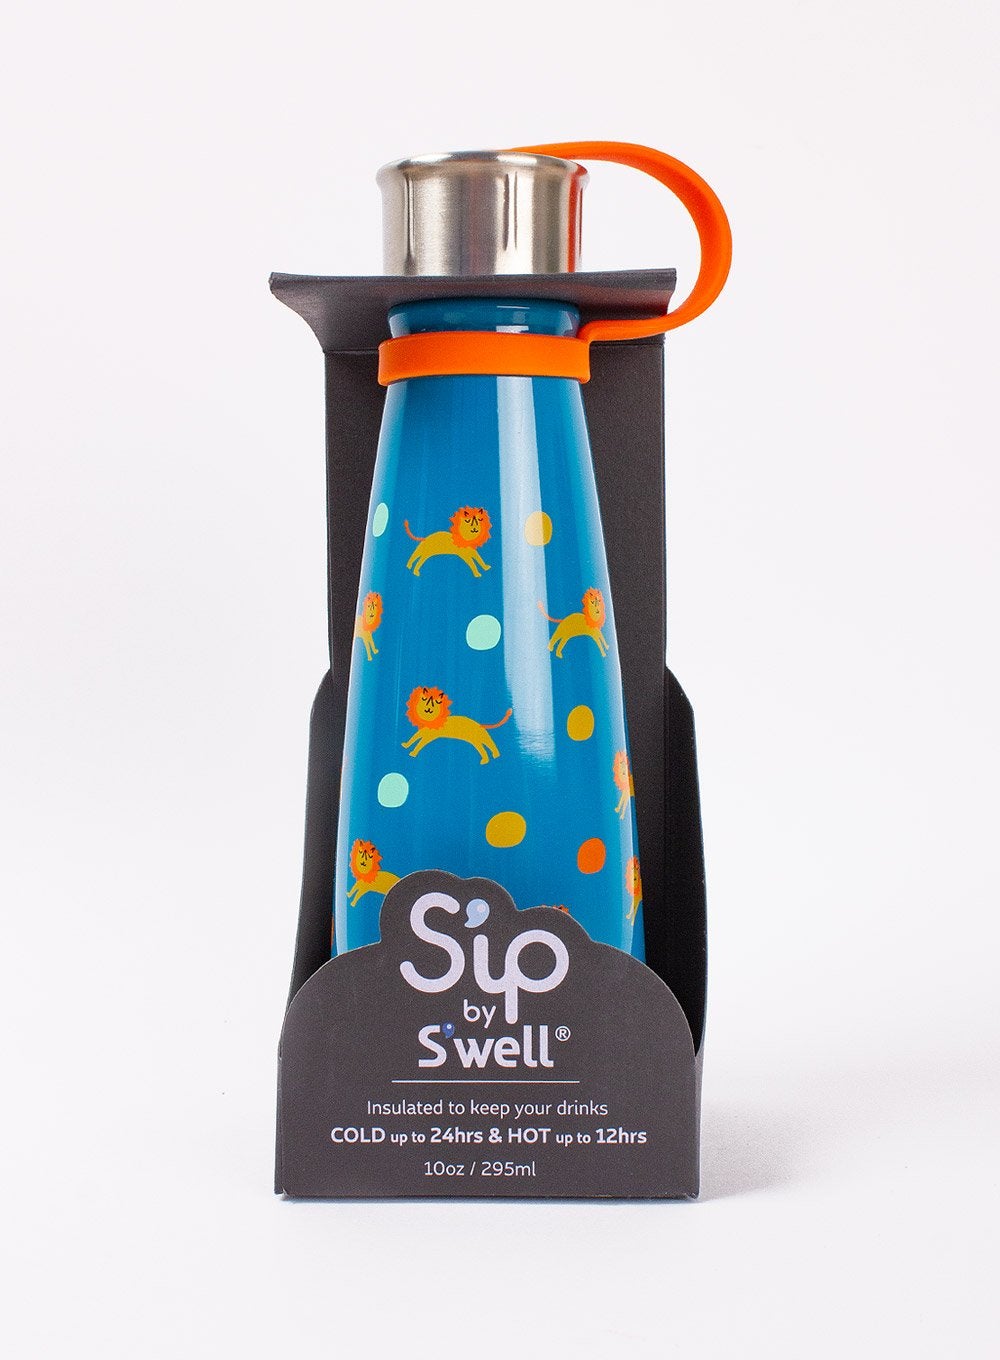 Sip by Swell Bottle Sip by Swell Insulated Water Bottle in Little Lion - Trotters Childrenswear